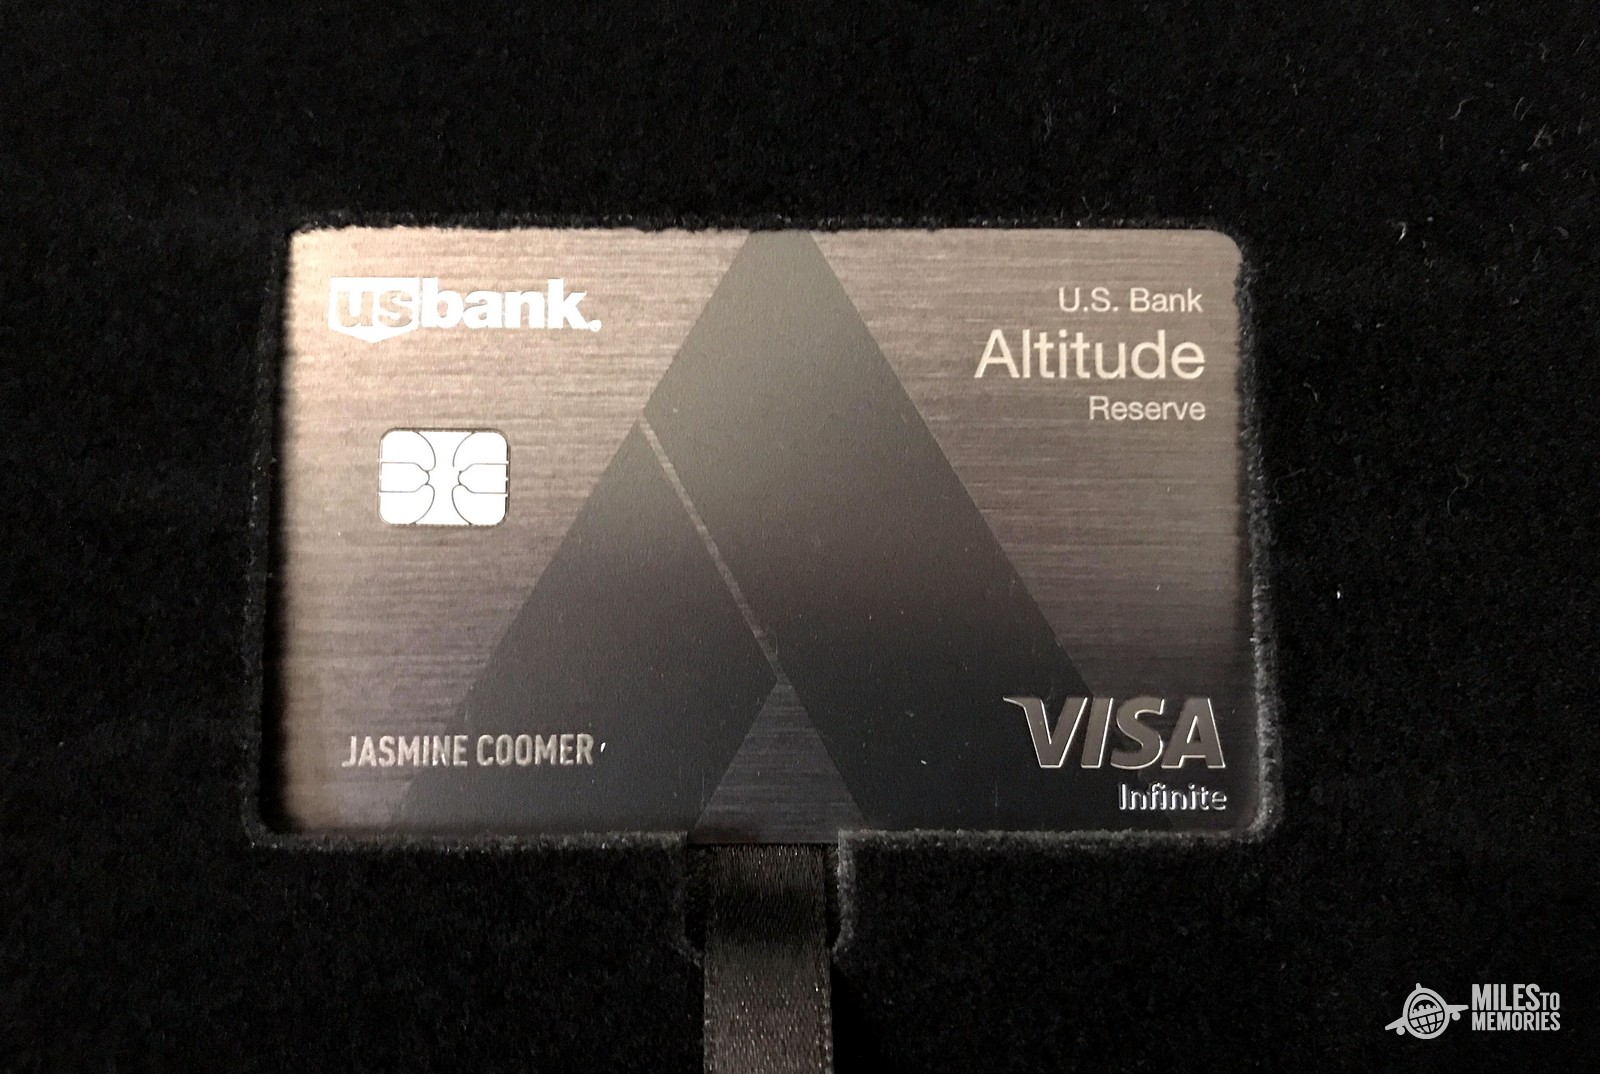 Paying the Altitude Reserve Annual Fee with Points